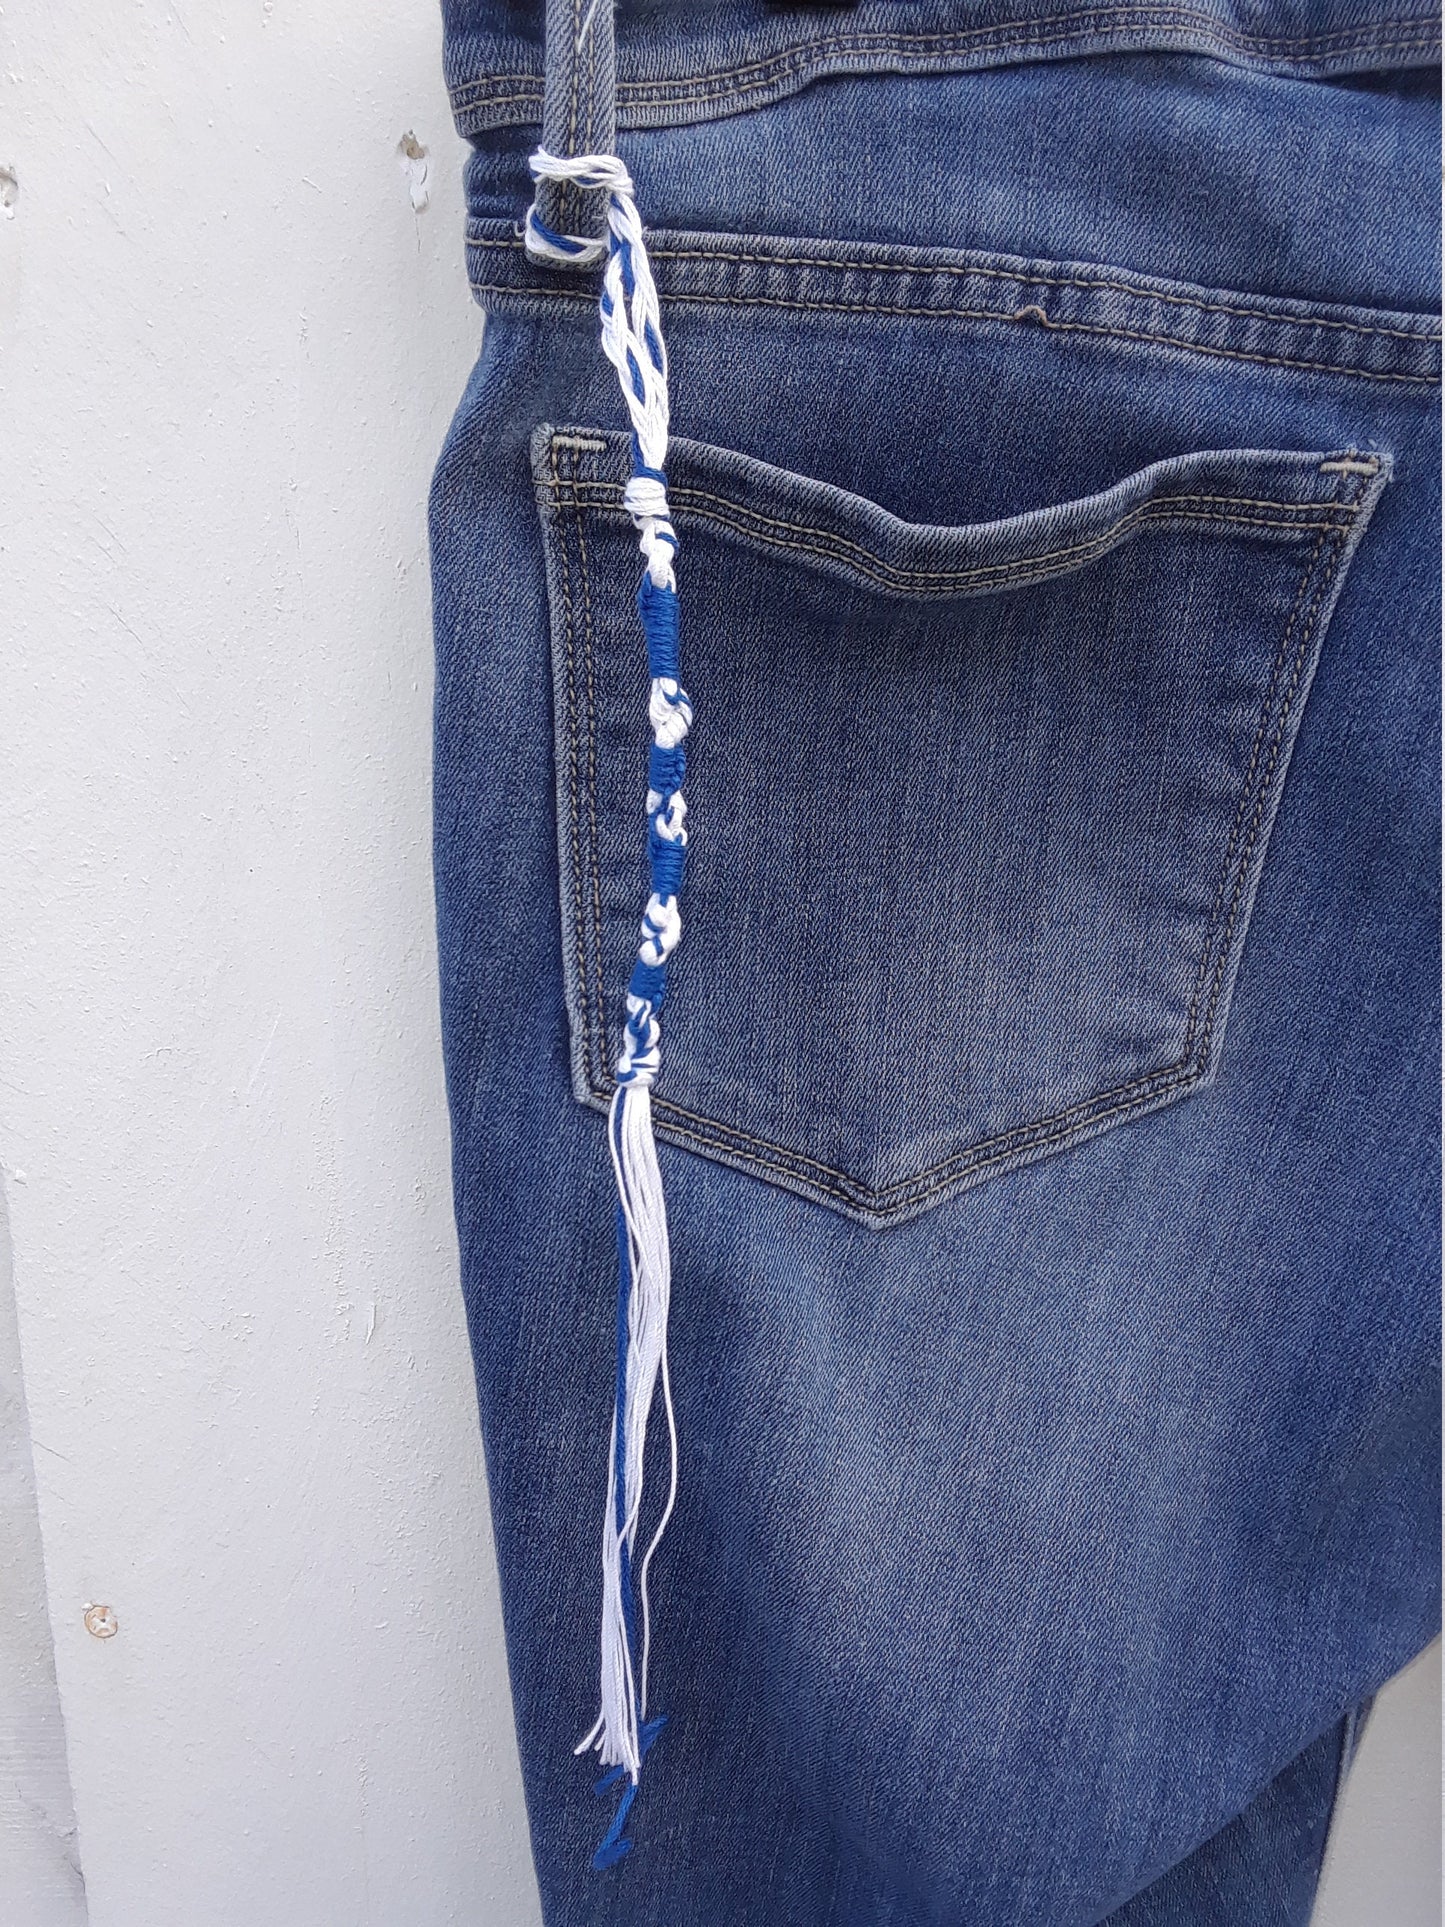 TZITZIT-TRADITIONAL Fringes/Tassels With Blue Messiah Techelet